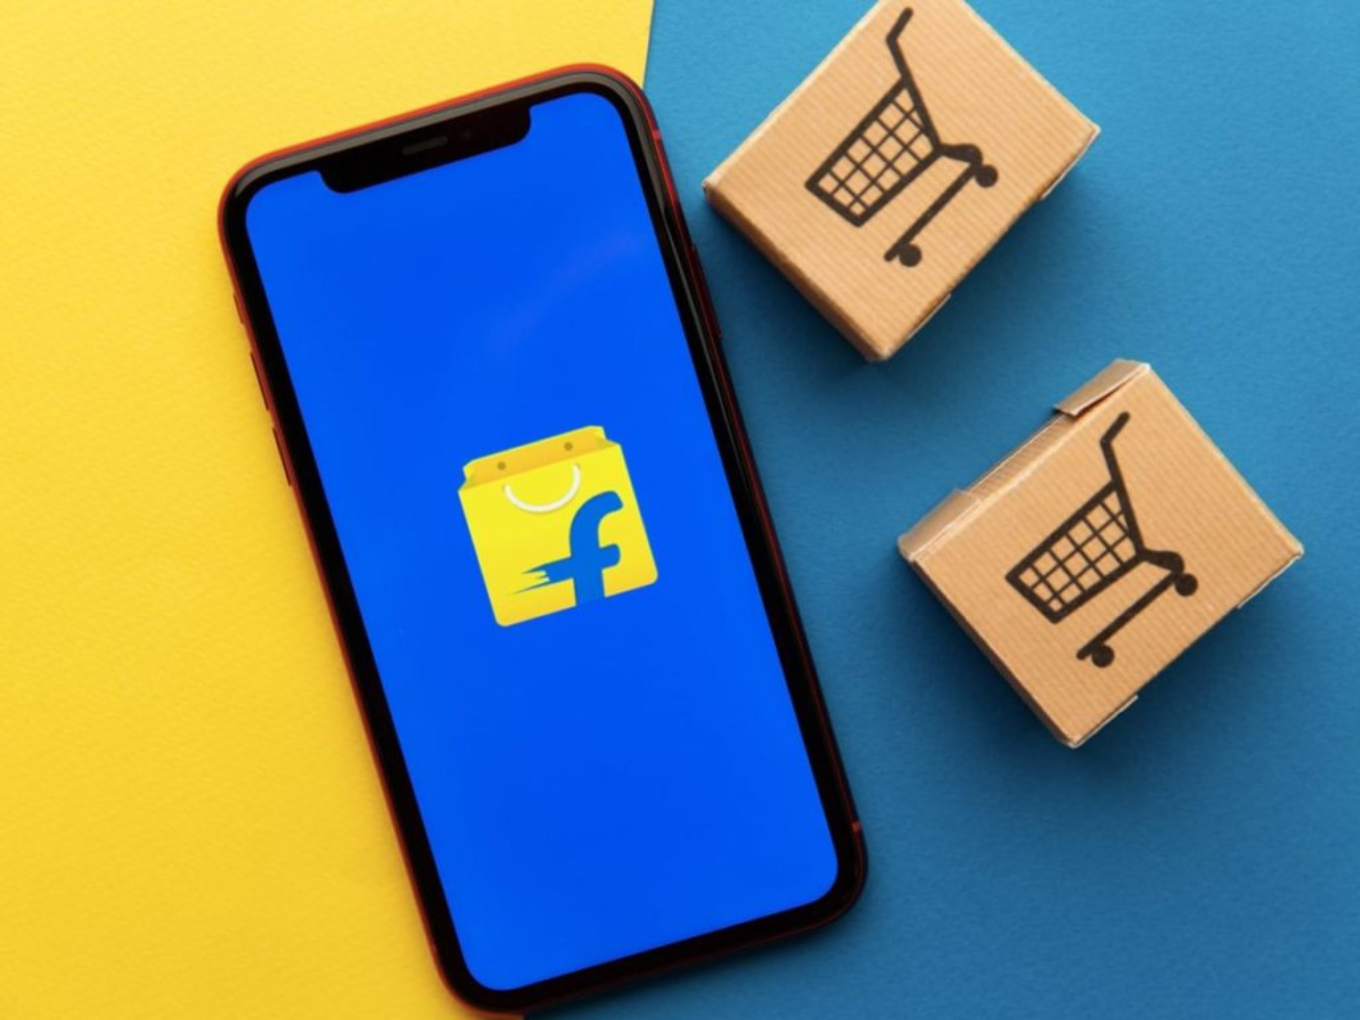 Flipkart India Gets INR 1,600 Cr Infusion From Singapore Entity Amid Festive Season Sale - Inc42 (Picture 1)